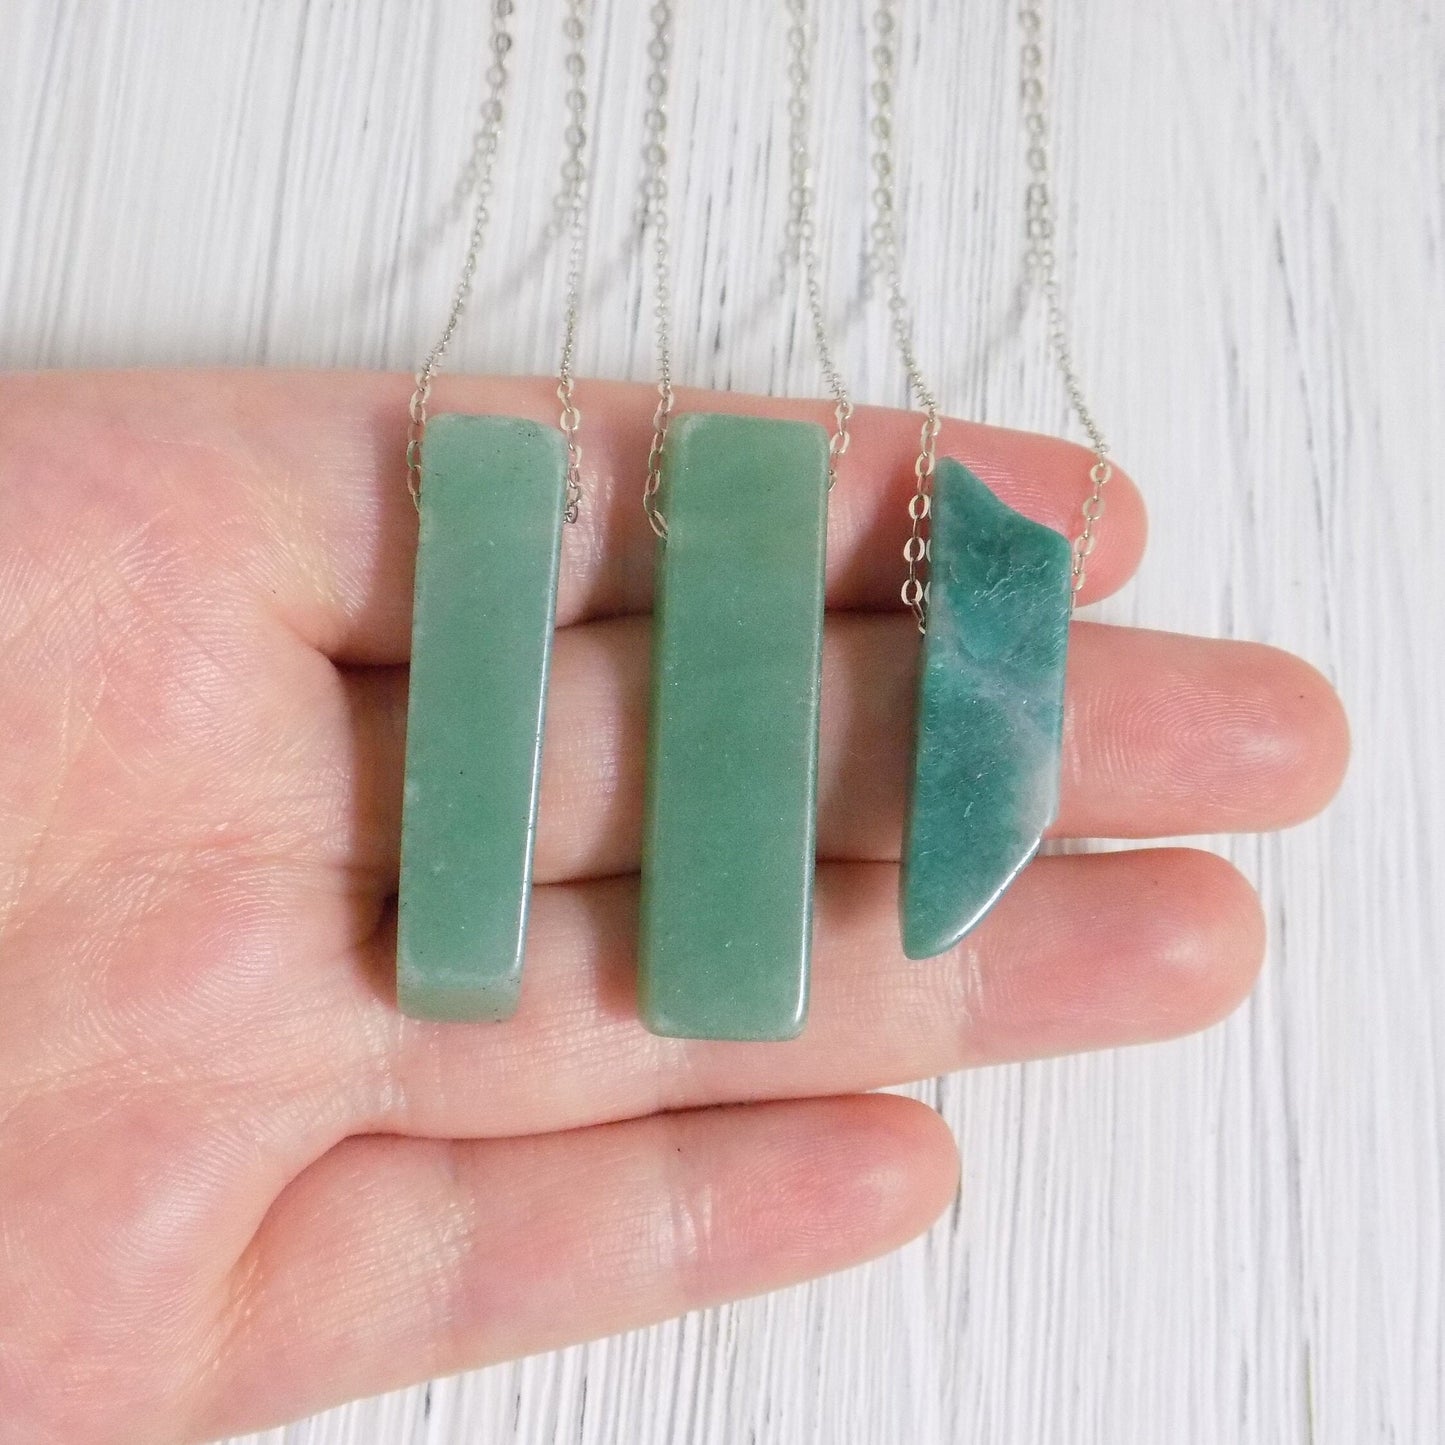 Aventurine Necklace, Green Aventurine Necklace Green Stone Necklace Gold OR Silver Layering Necklace Large Pendant Necklace Gift Women K2-01